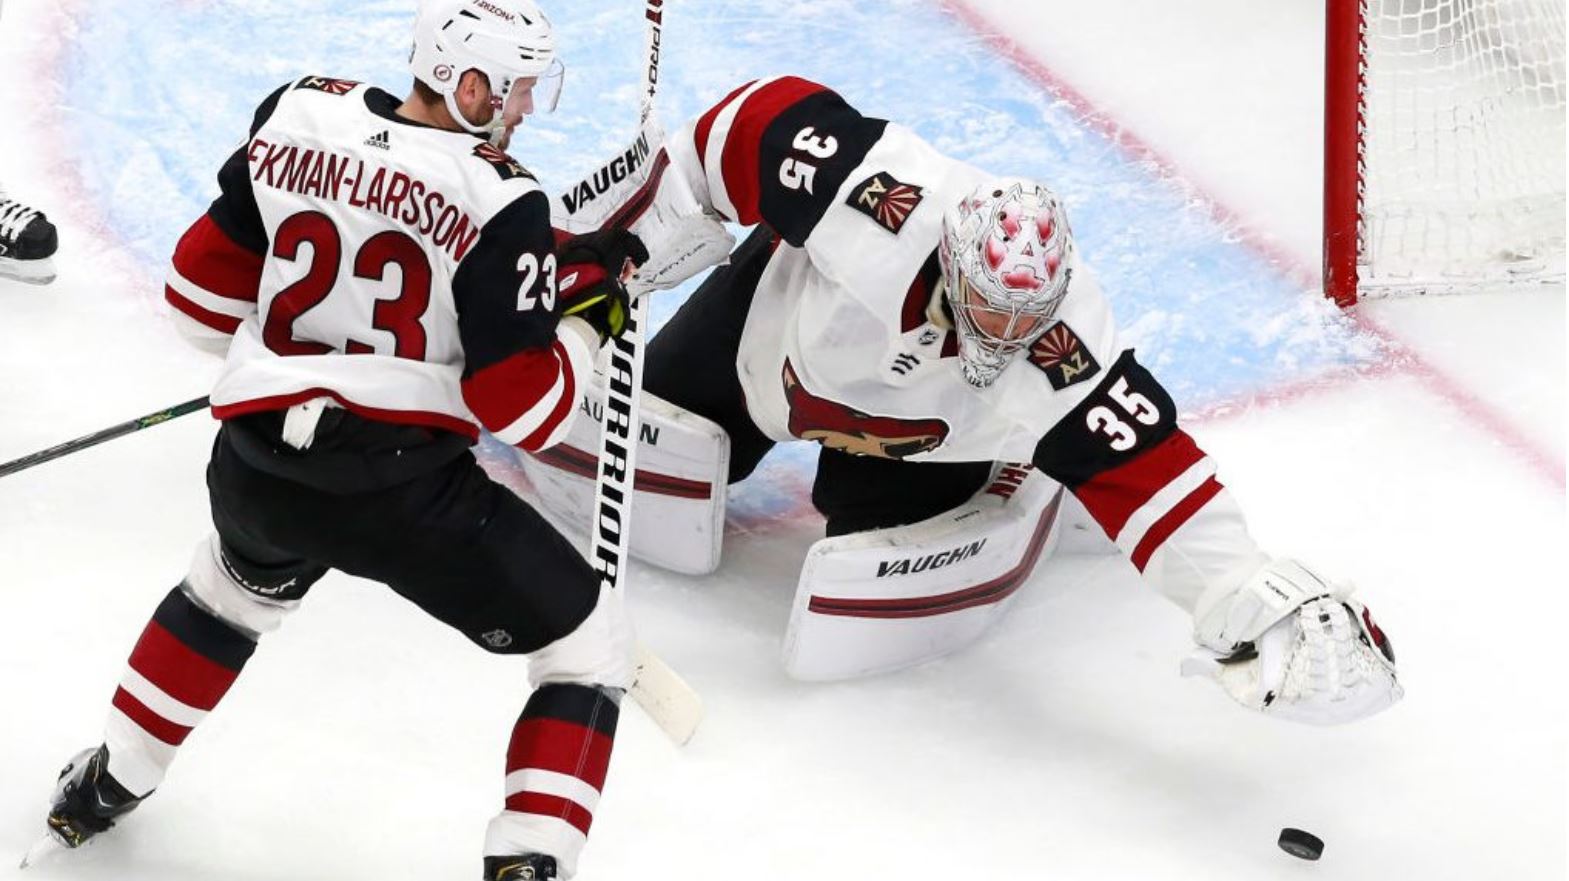 Tempe holds special meeting over proposed Arizona Coyotes hockey